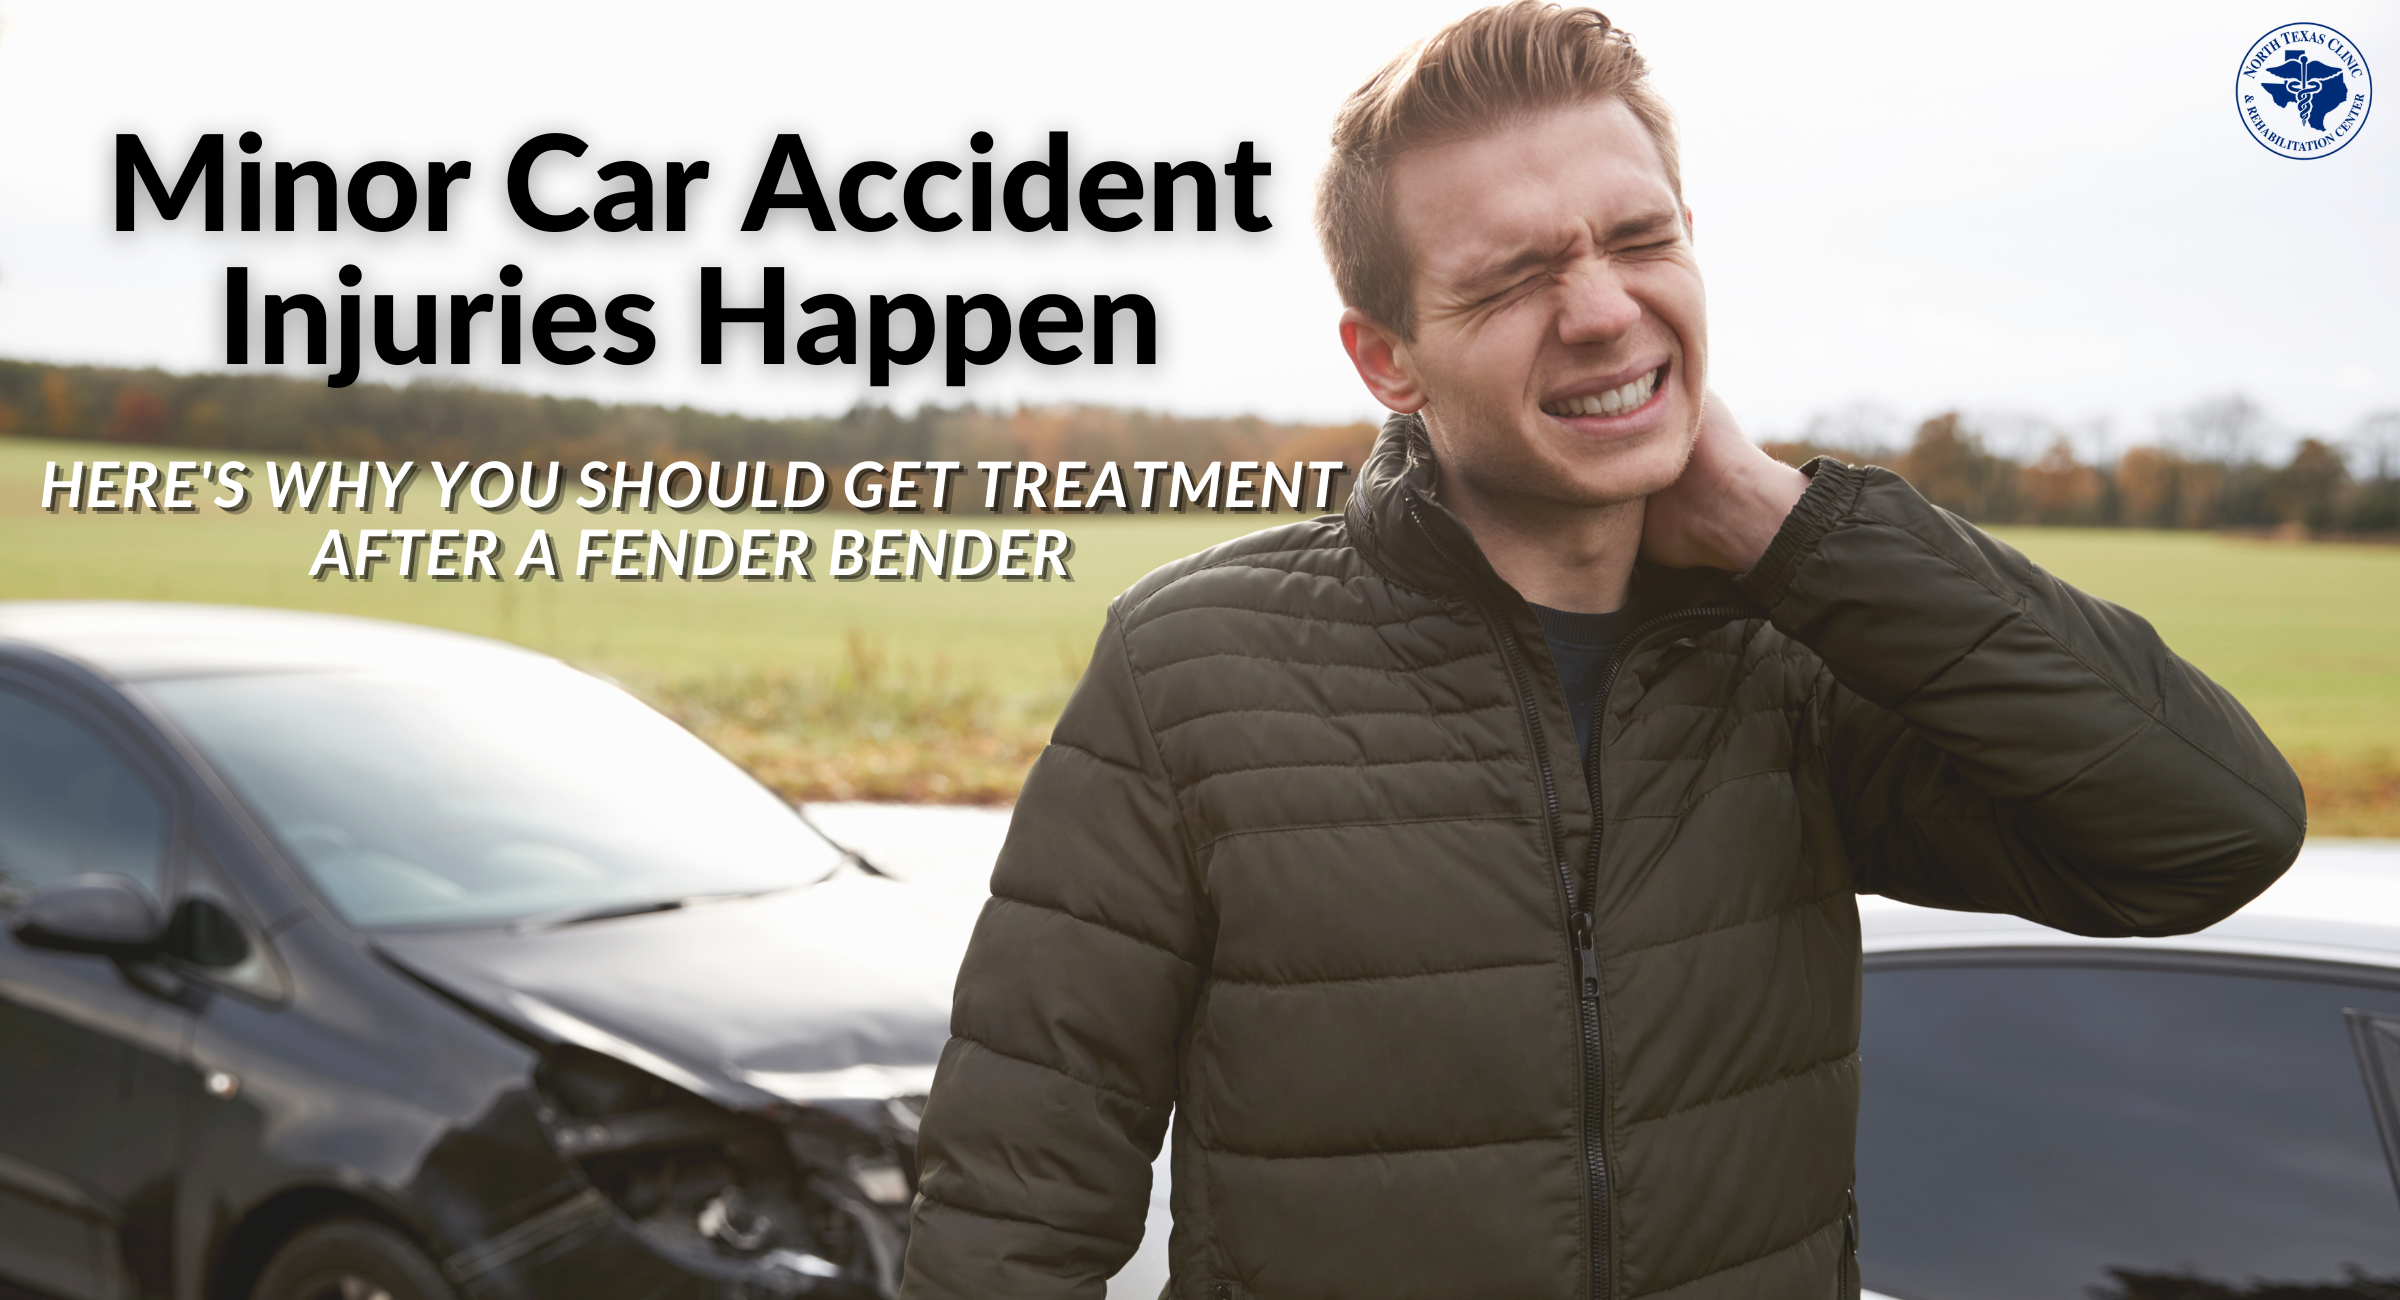 minor car accident injuries happen: here's what why you need treatment